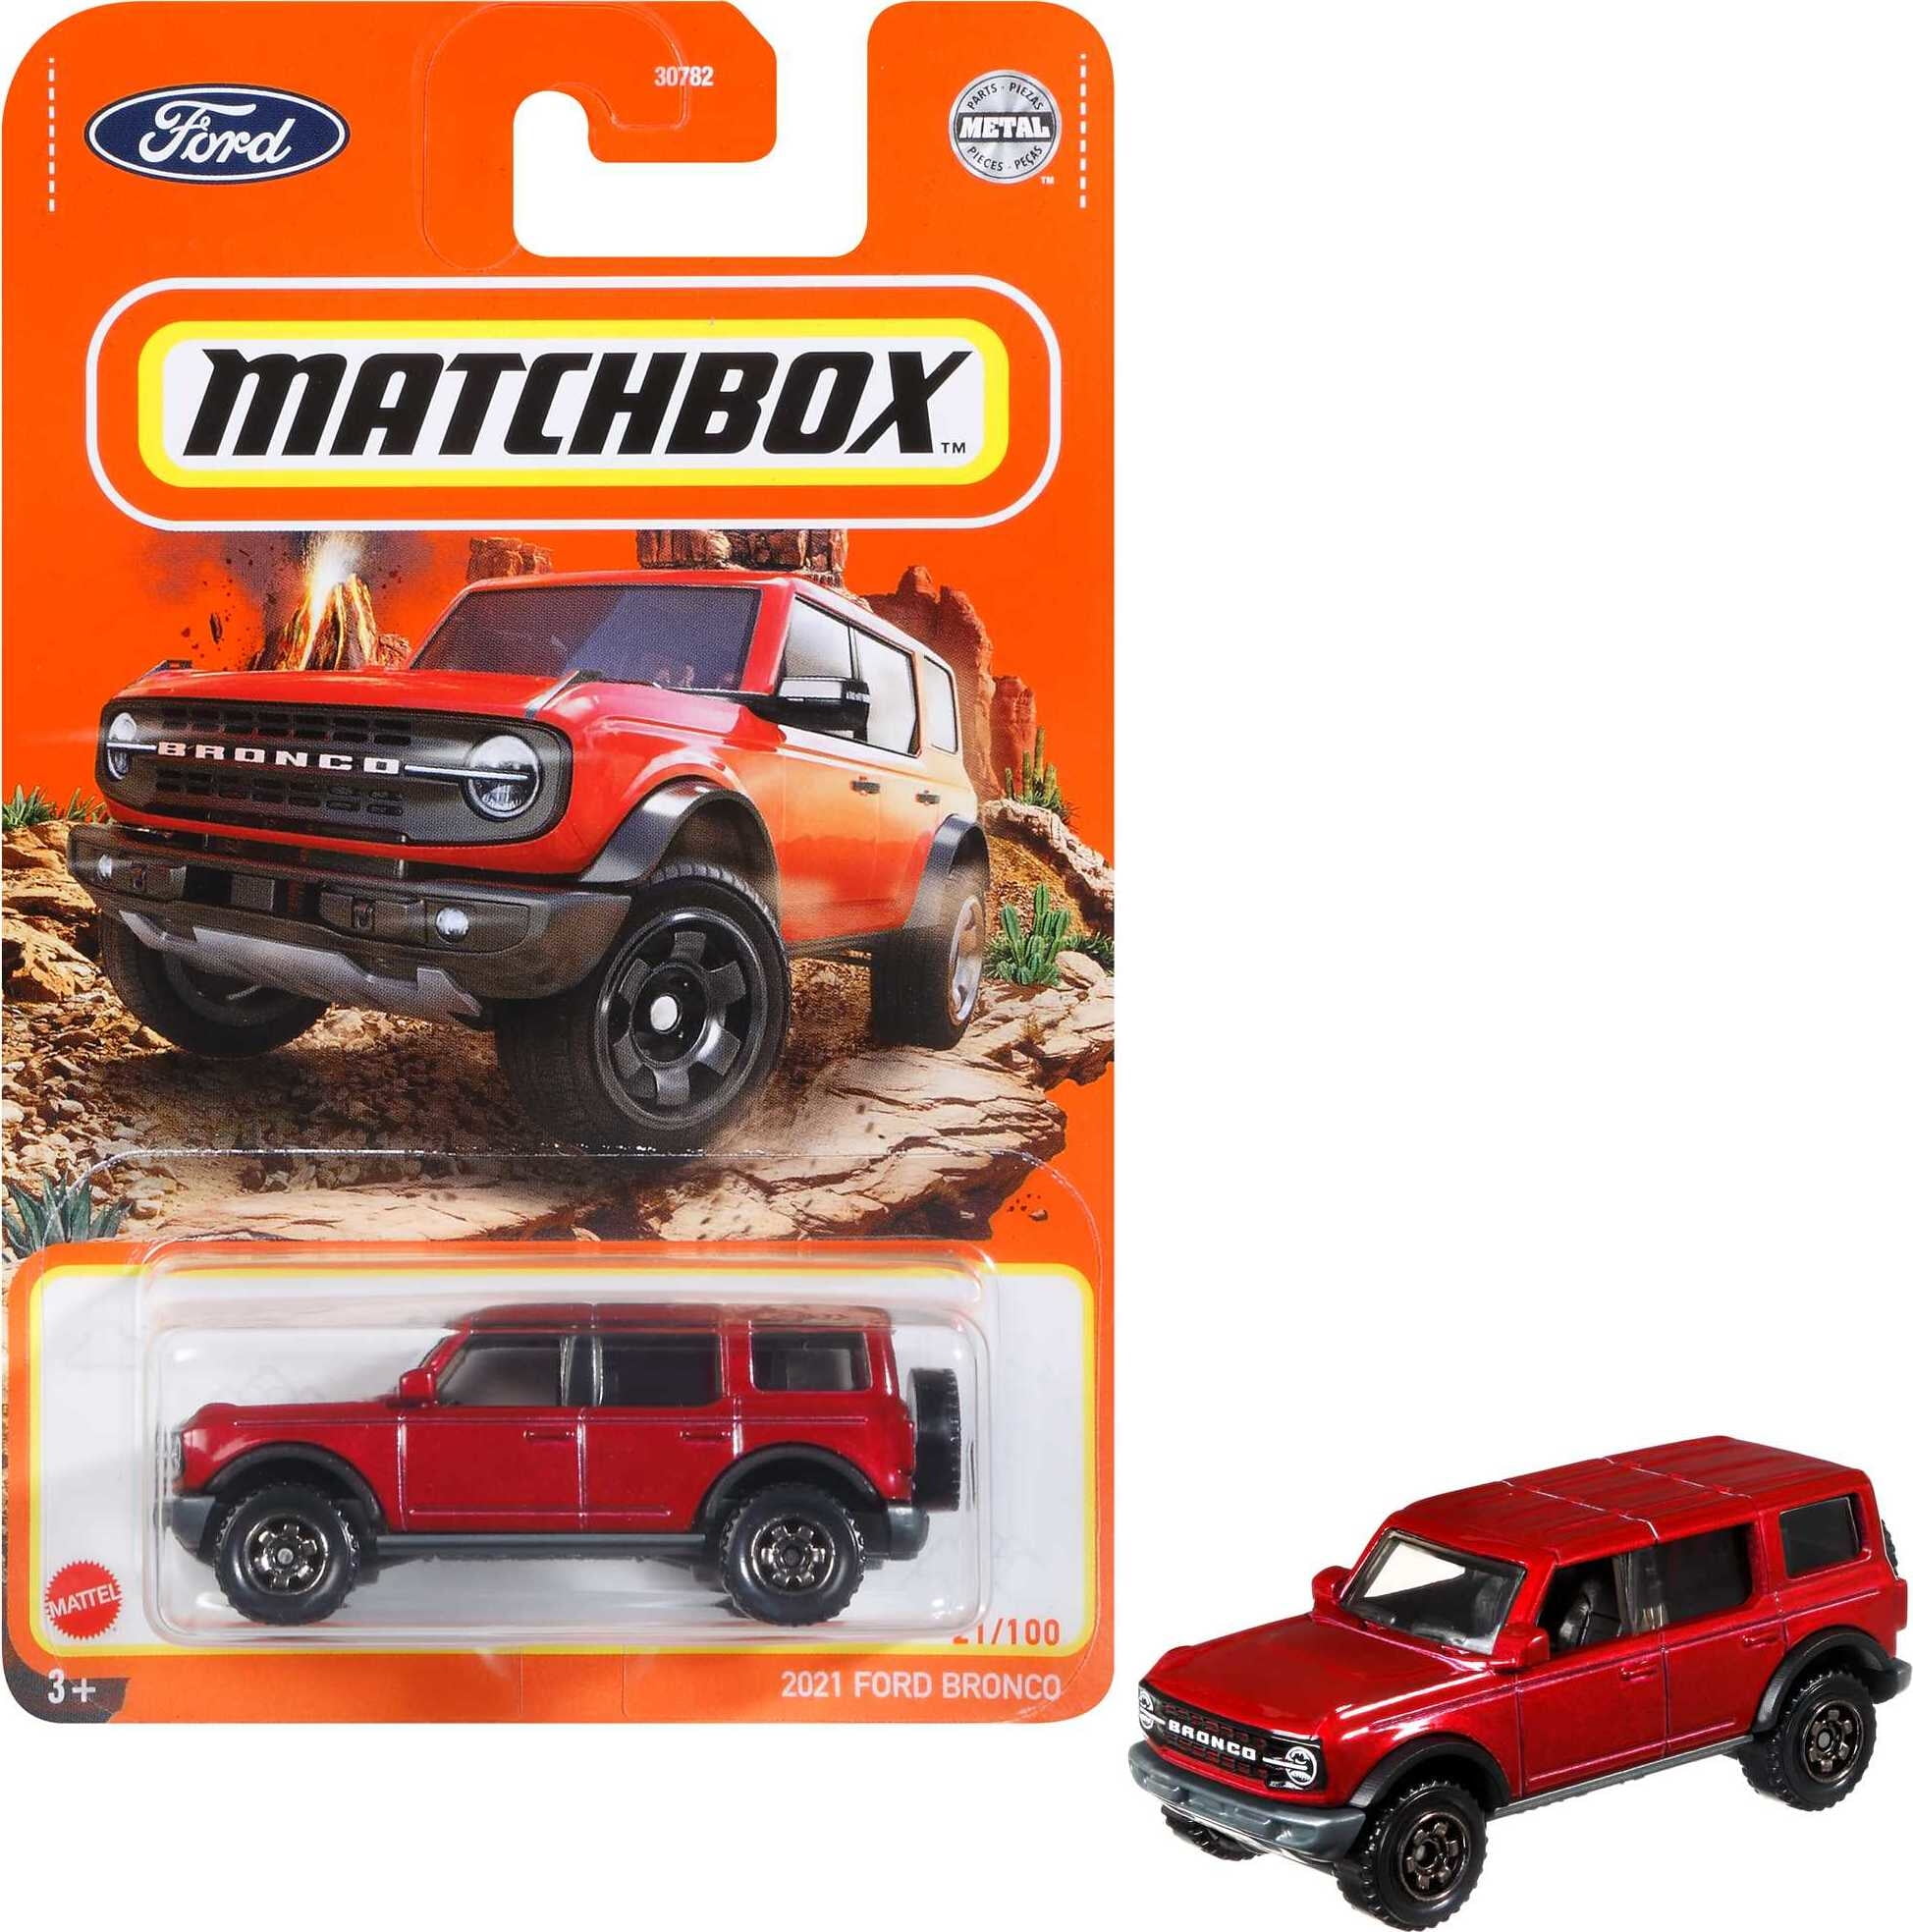 Ellos Napier anchura Matchbox Single 1:64 Scale Toy Car, Truck or Other Vehicle (Styles May  Vary) - Walmart.com